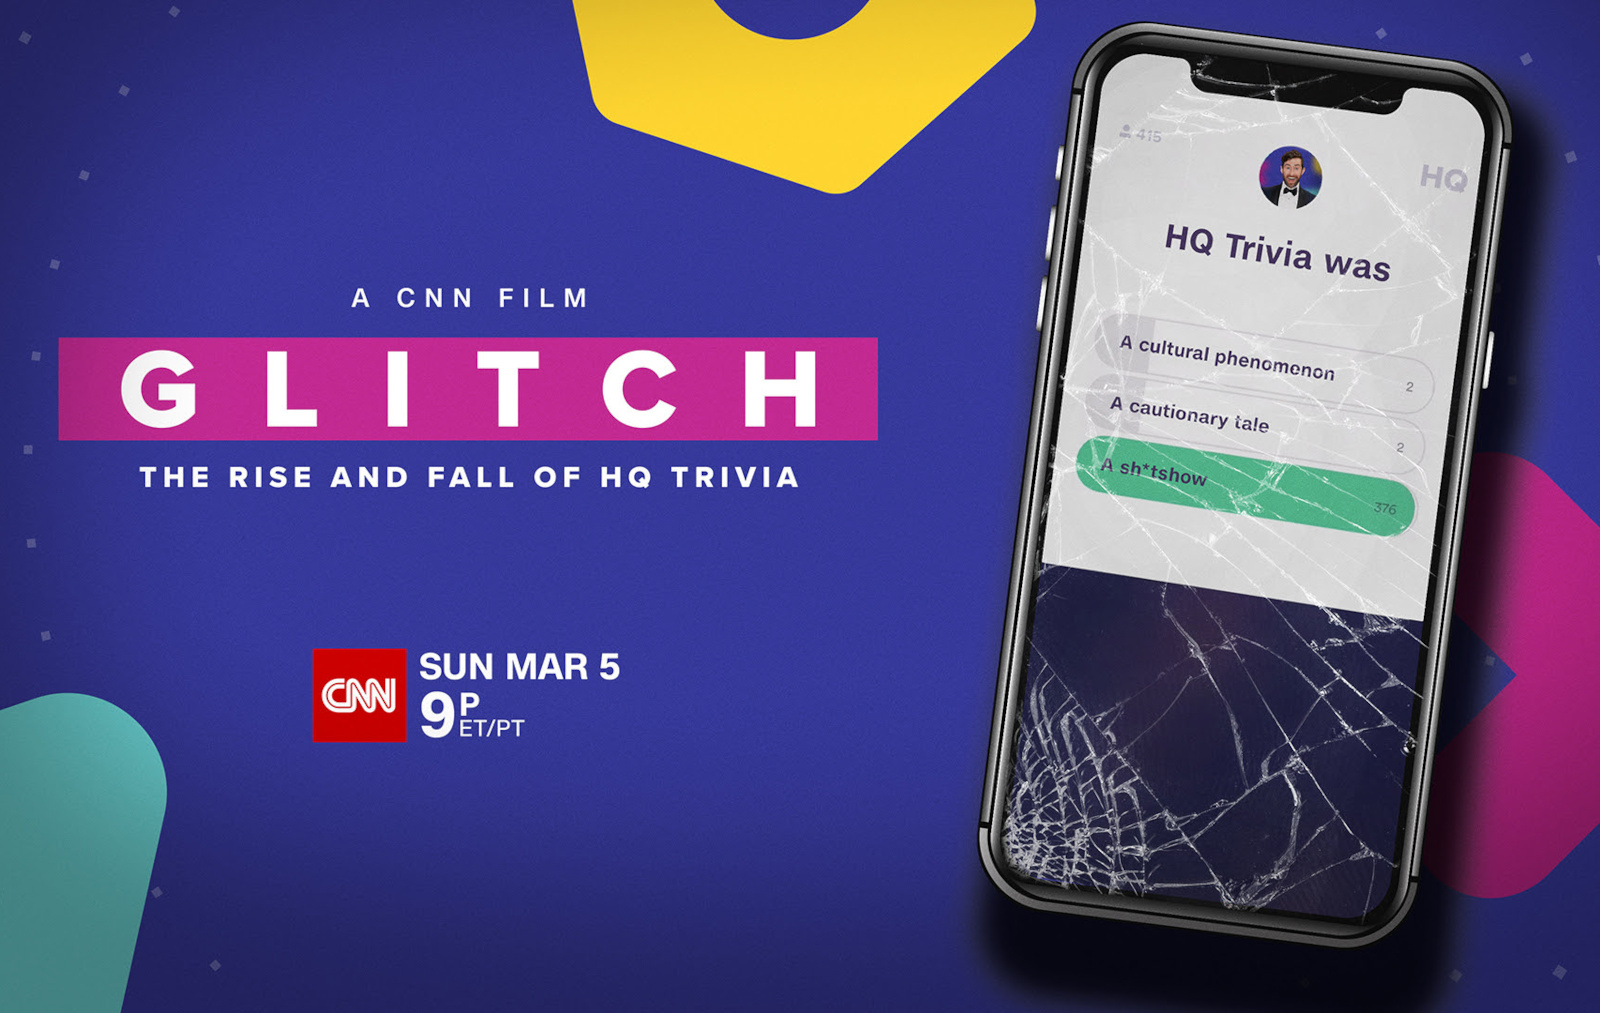 Watch the trailer for CNN's documentary on the rise and fall of HQ Trivia